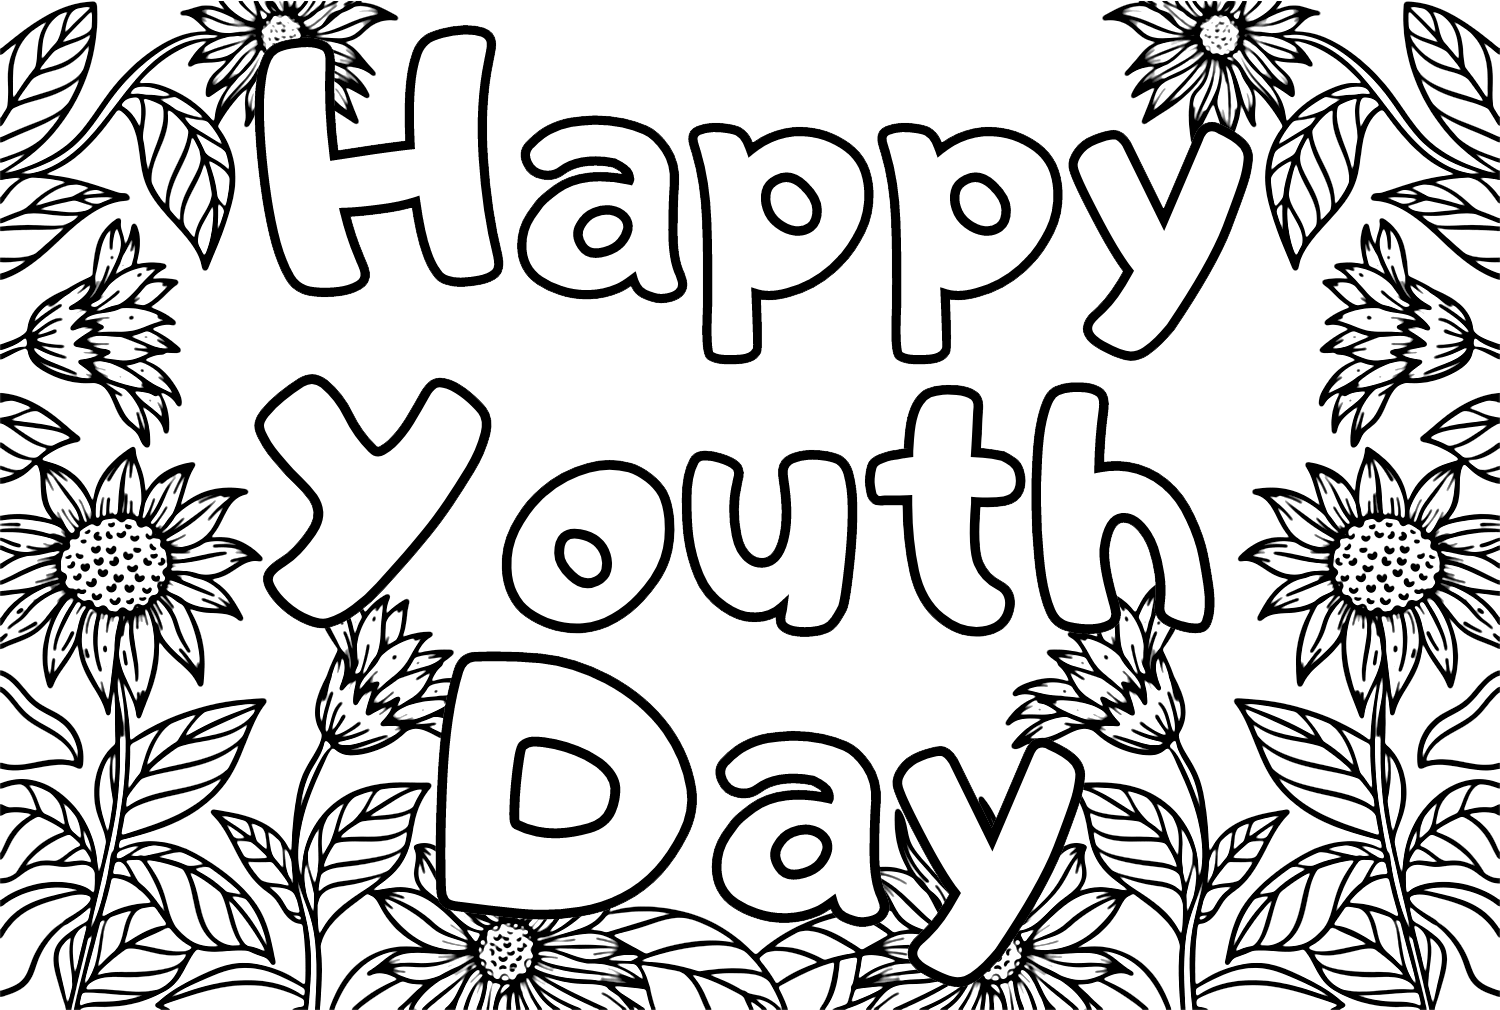 Happy Youth Day Coloring Page from International Youth Day